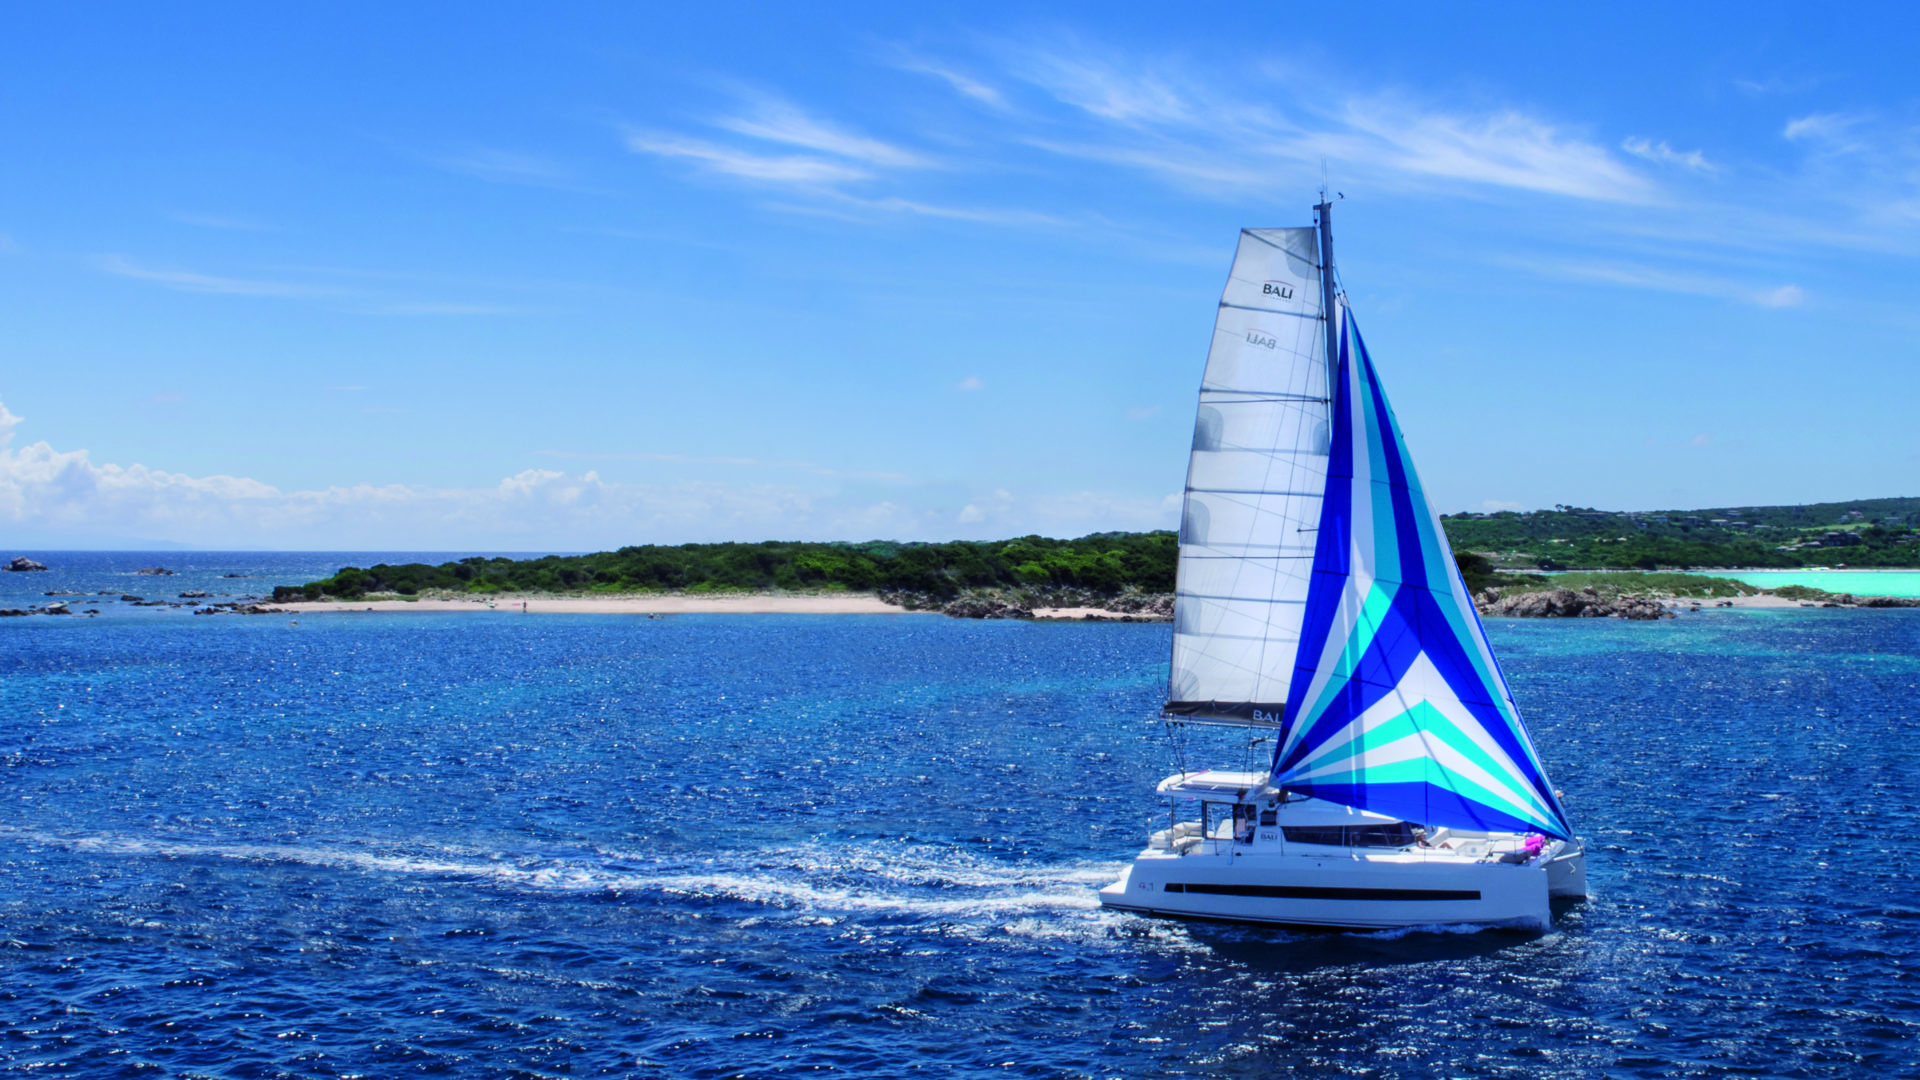 Sail Boat: Catamaran, A twin-hull boat with two equally-sized hulls placed side by side. 1920x1080 Full HD Wallpaper.